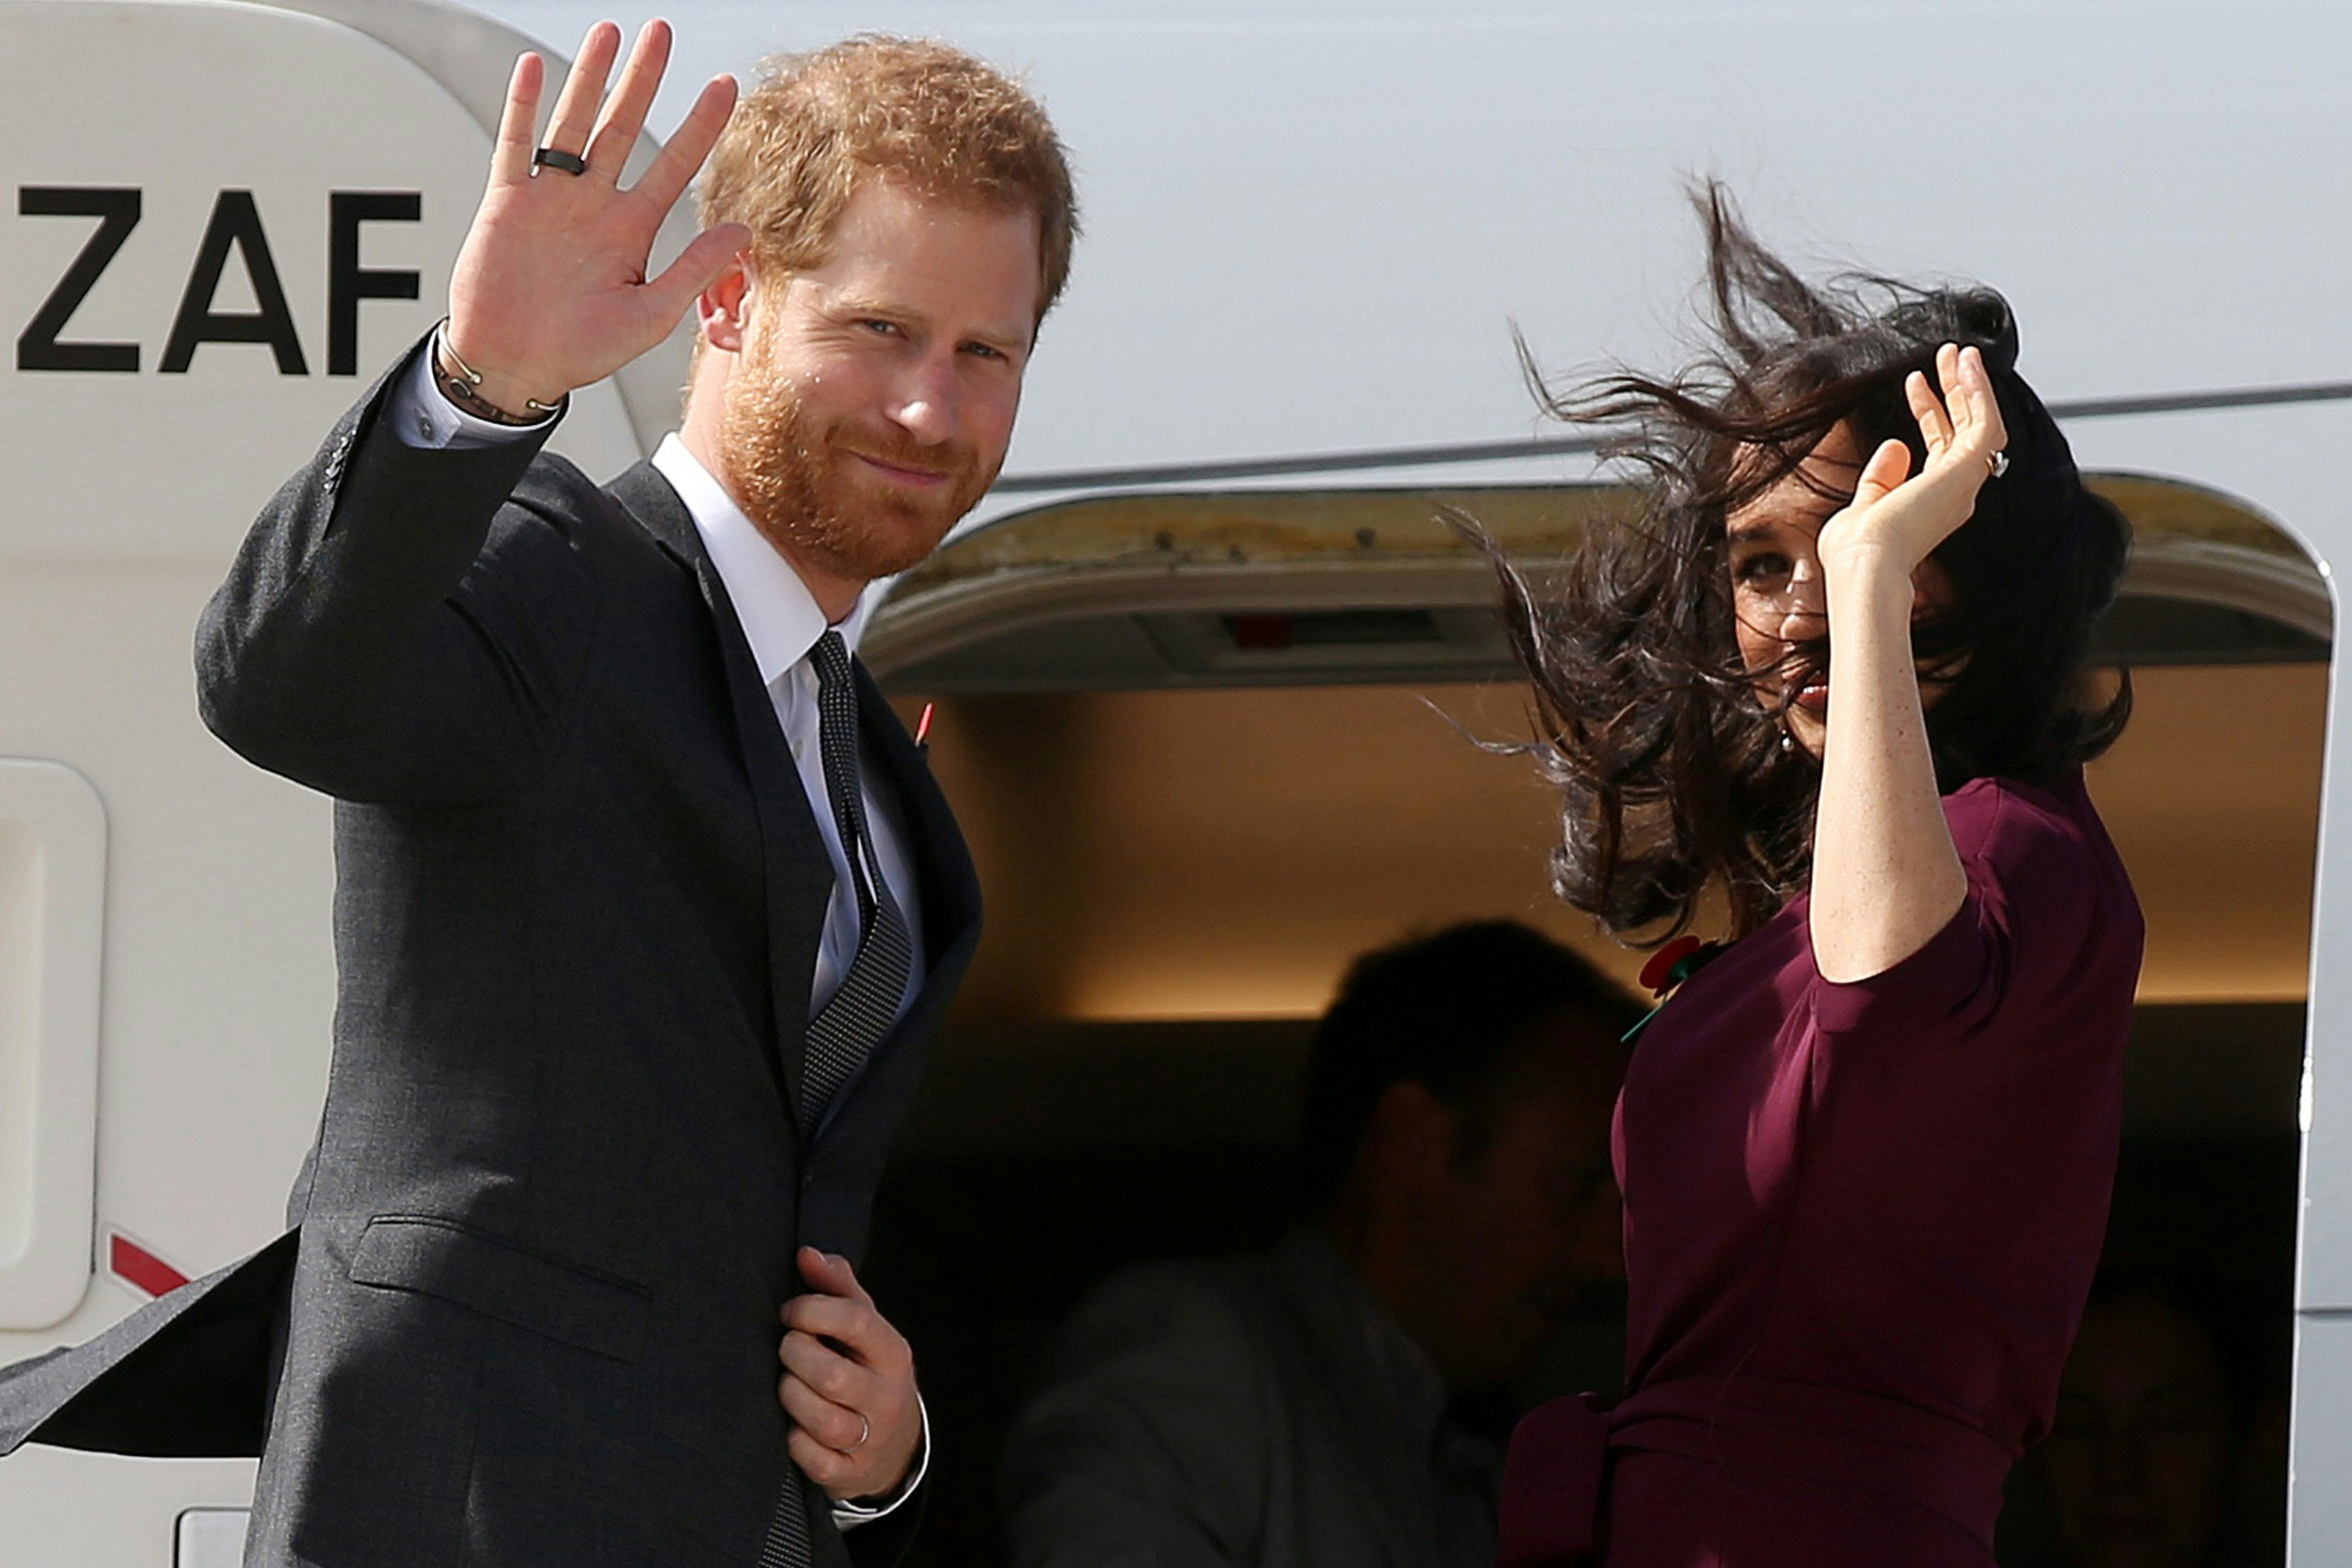 Harry and Meghan boarding a place